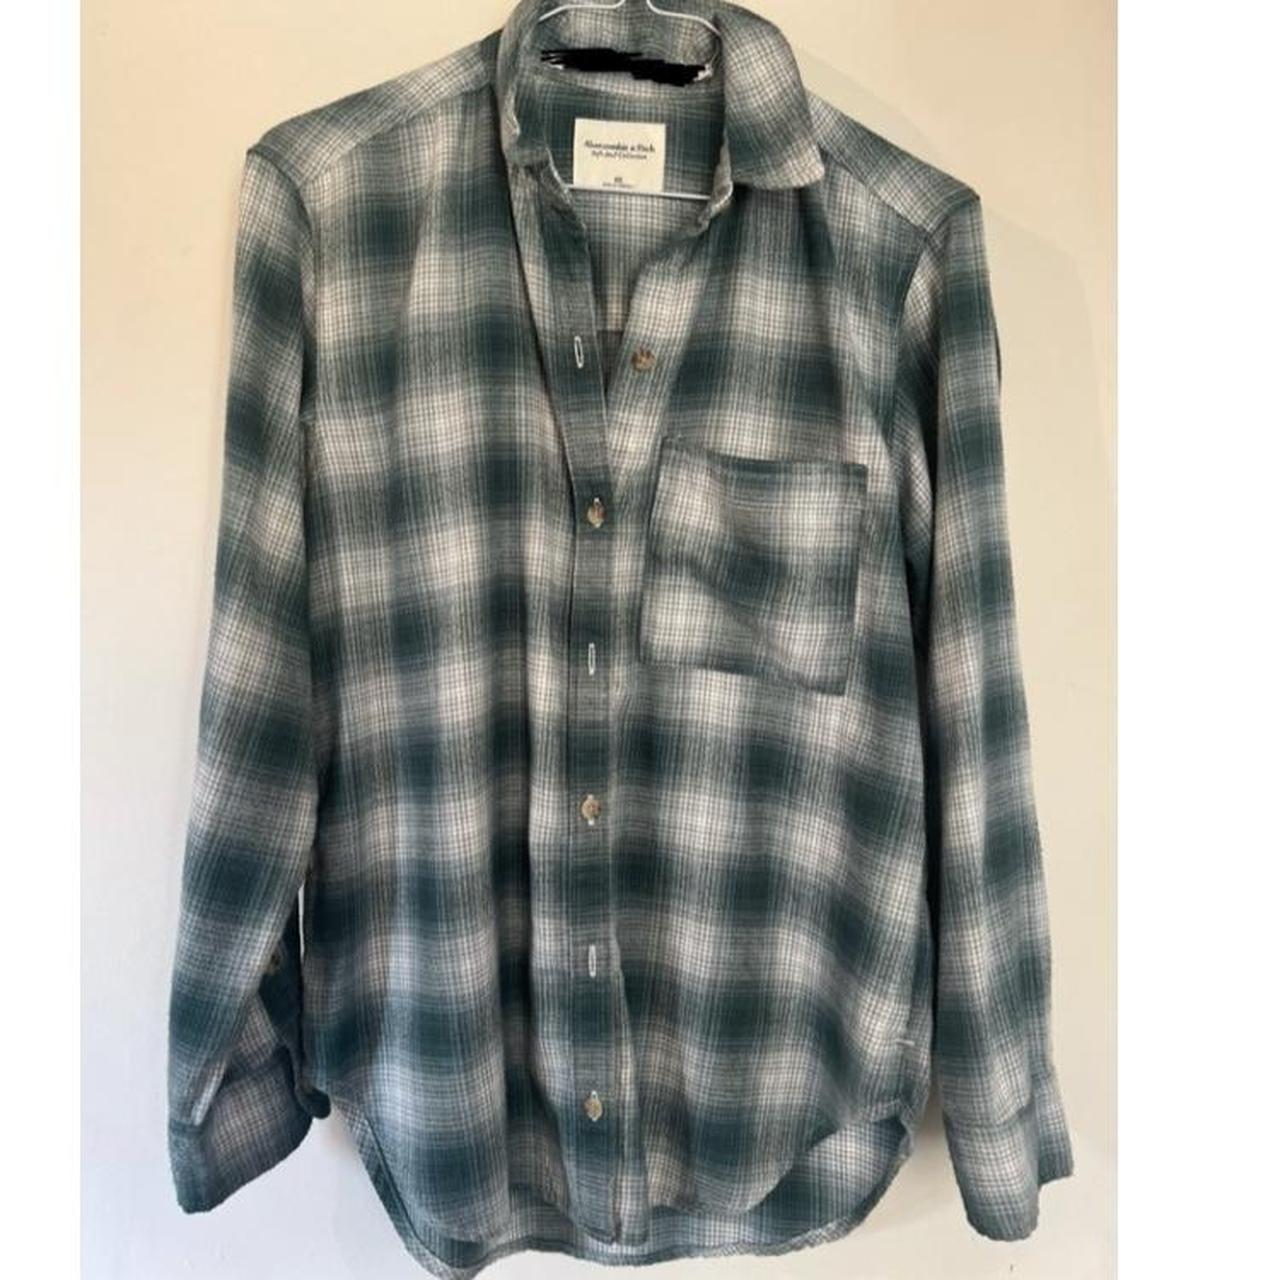 SUPER SOFT FLANNEL SHIRT 💚 - Abercrombie and Fitch... - Depop